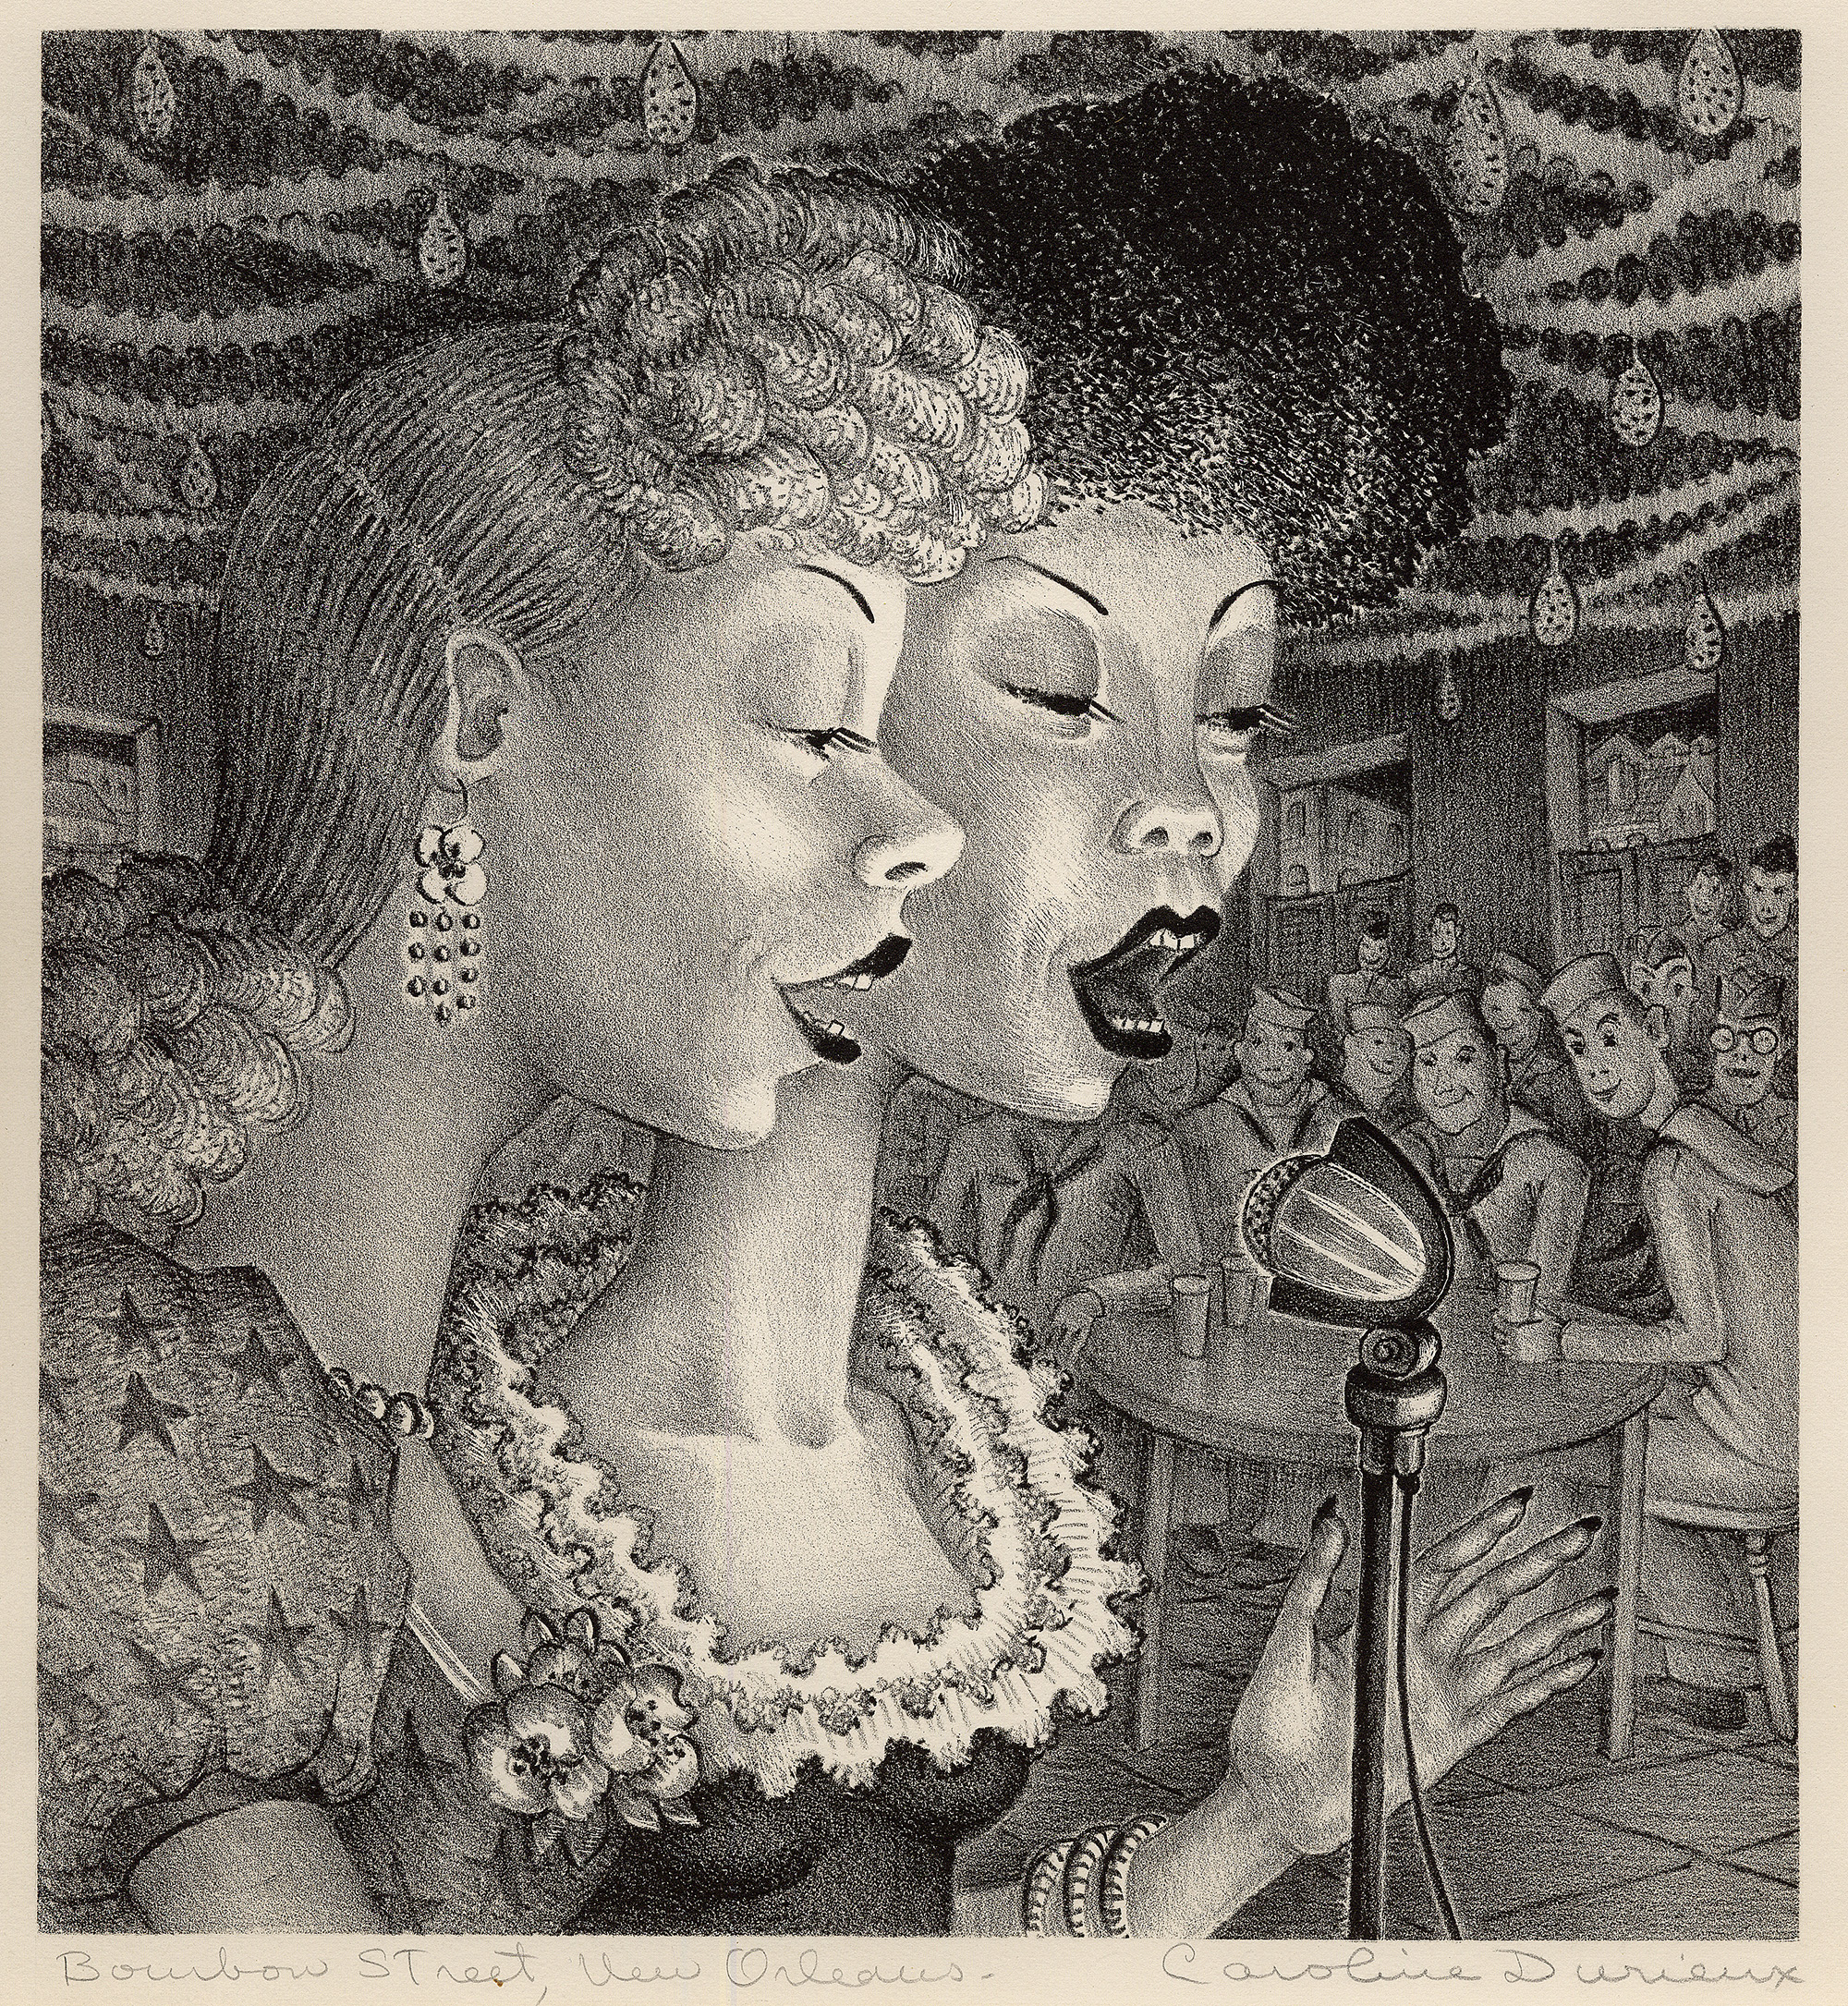 Black and white drawing of two Black women singing into a microphone with navy crew men listening